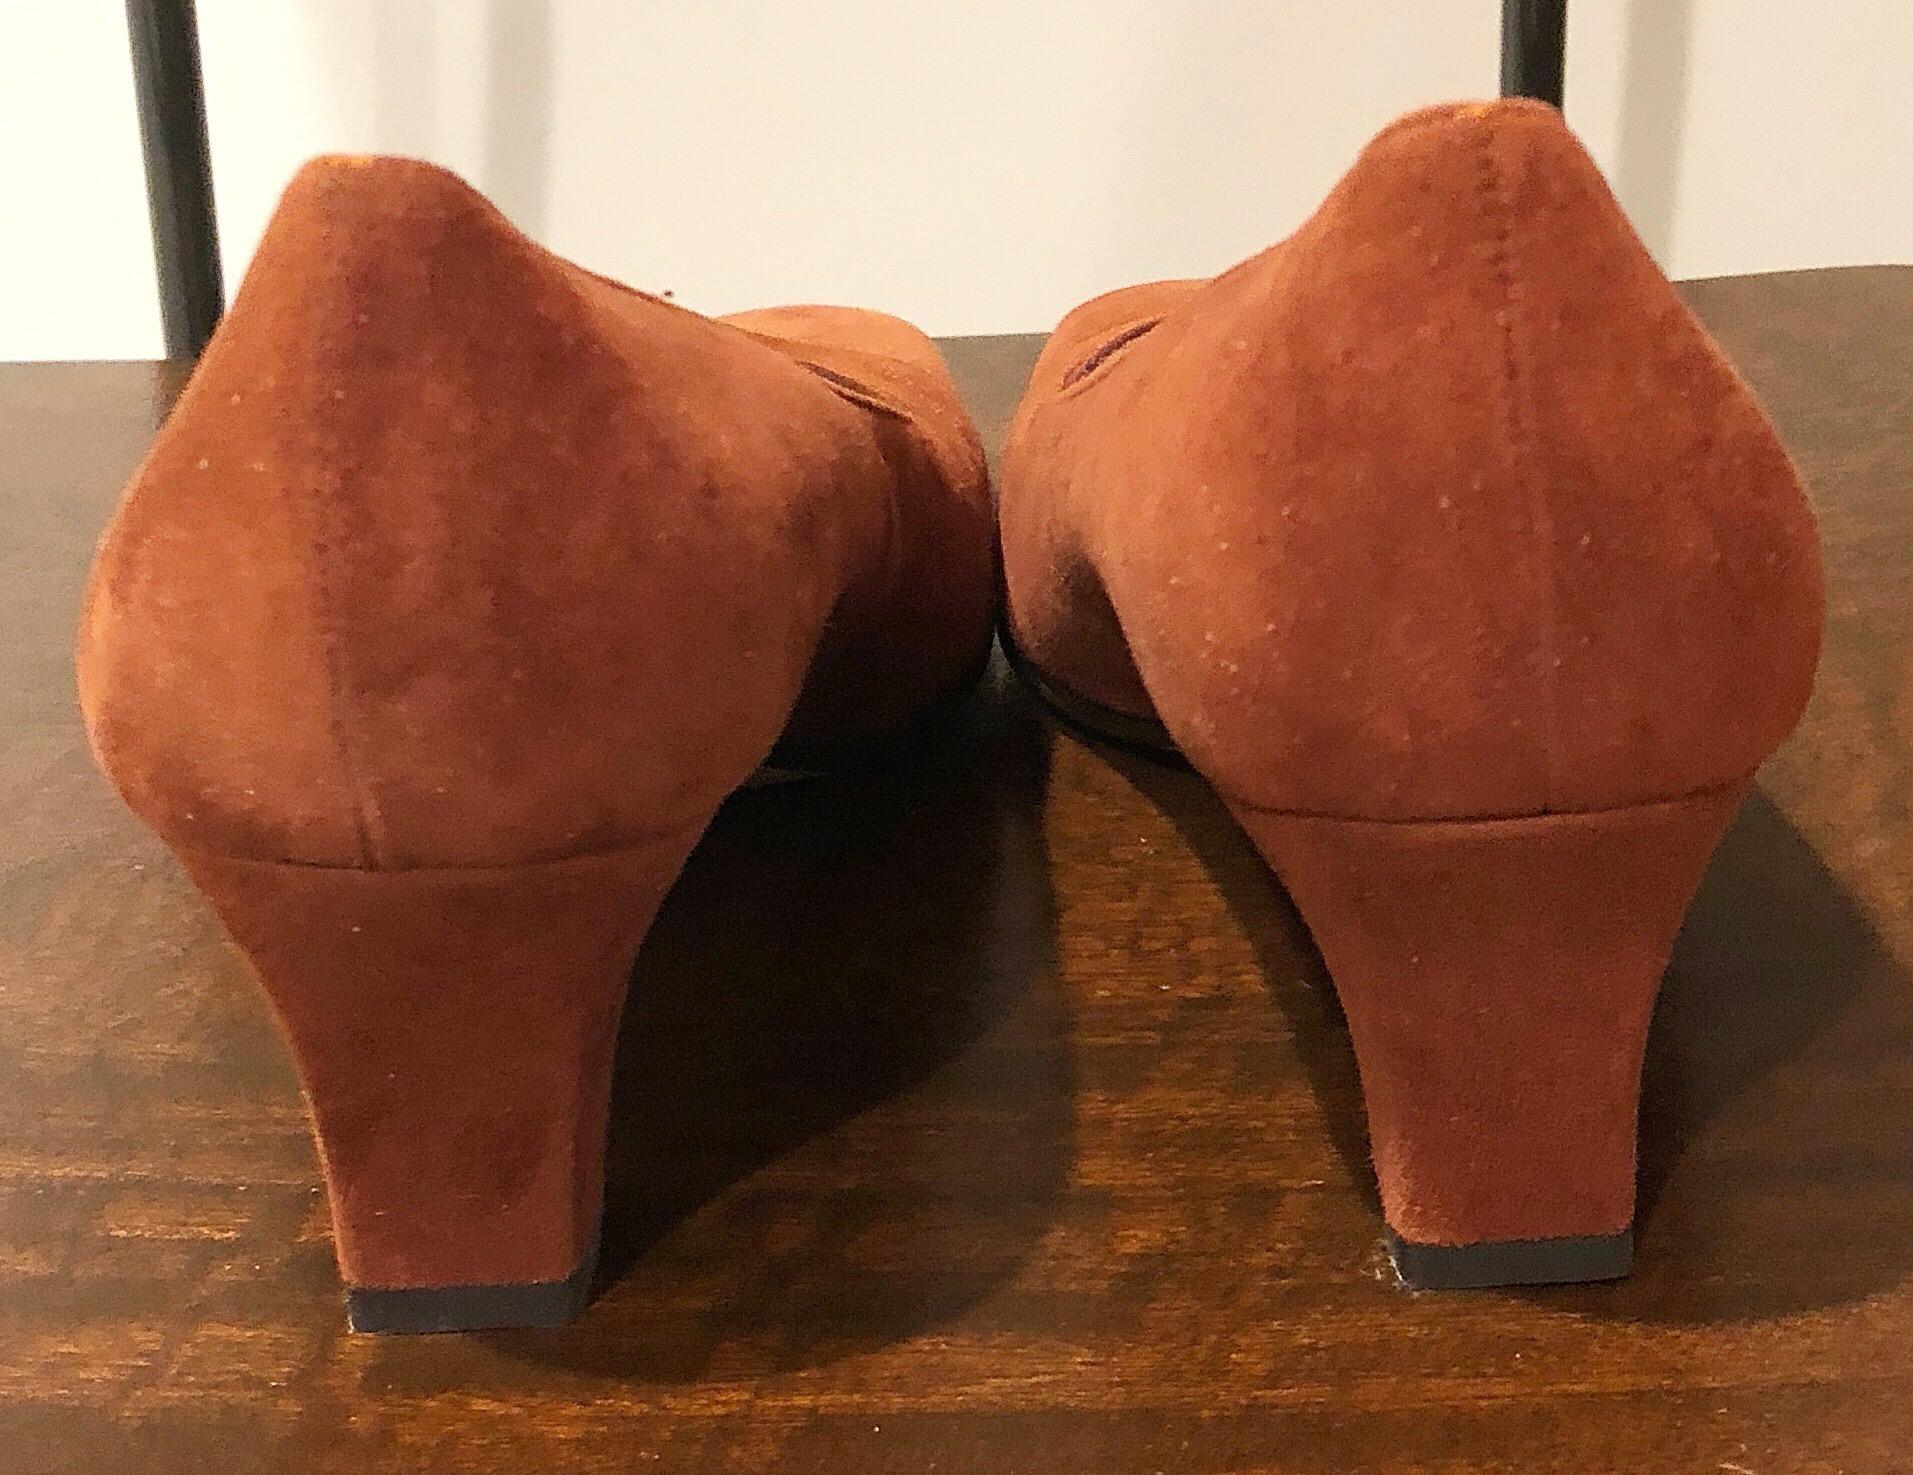 New 1990s Salvatore Ferragamo Size 6.5 Light Brown Suede Low Heels Vintage Shoes In New Condition For Sale In San Diego, CA